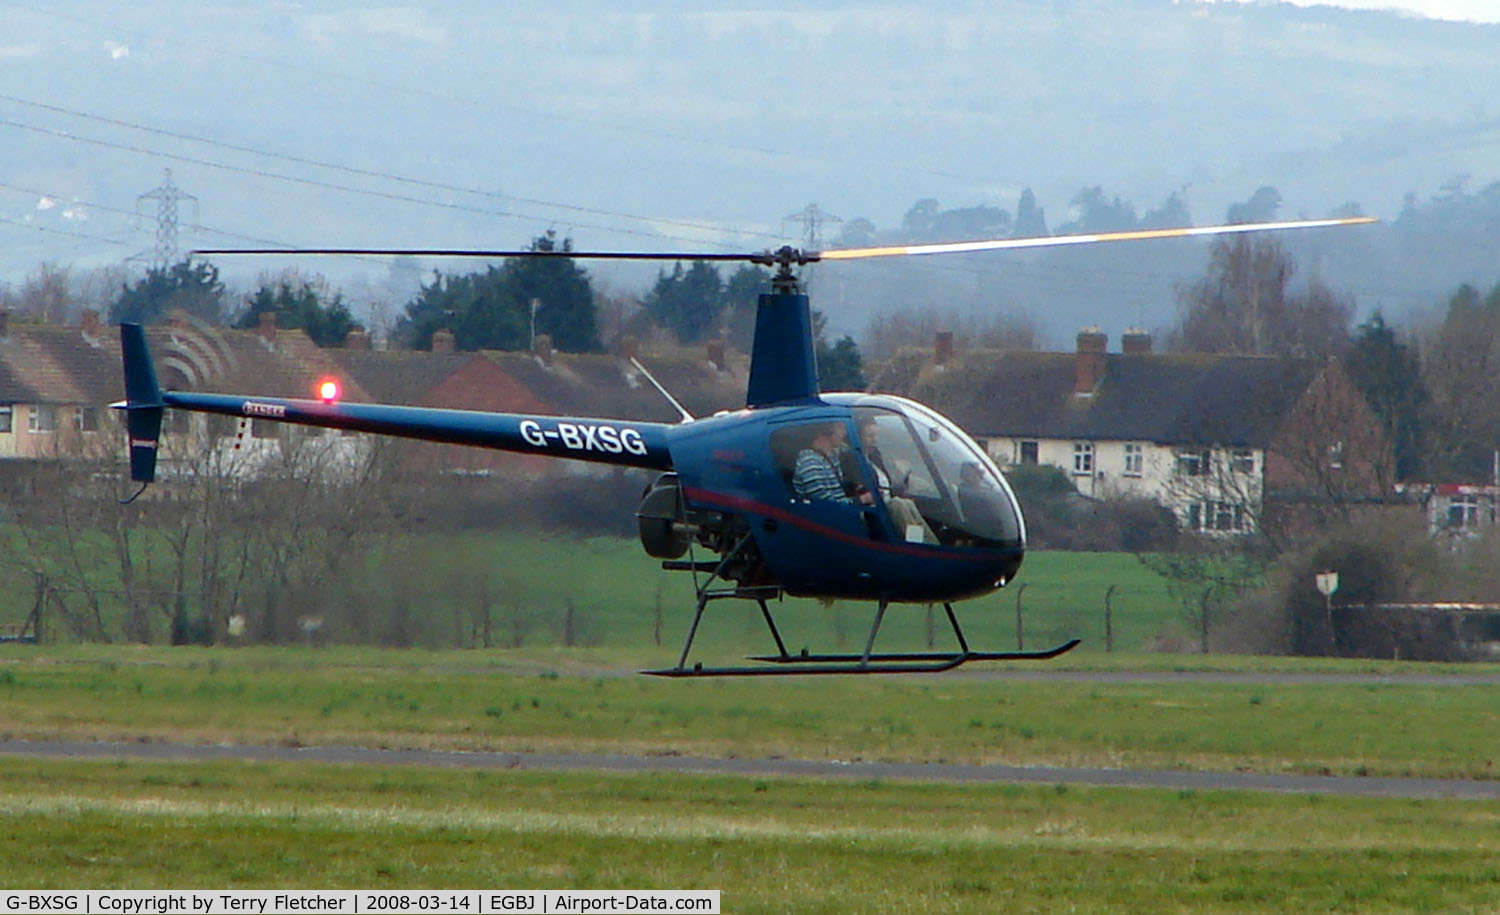 G-BXSG, 1998 Robinson R22 Beta C/N 2789, A visitor to Gloucestershire Airport on the day of the horse racing Gold Cup  at the nearby Cheltenham Racecourse